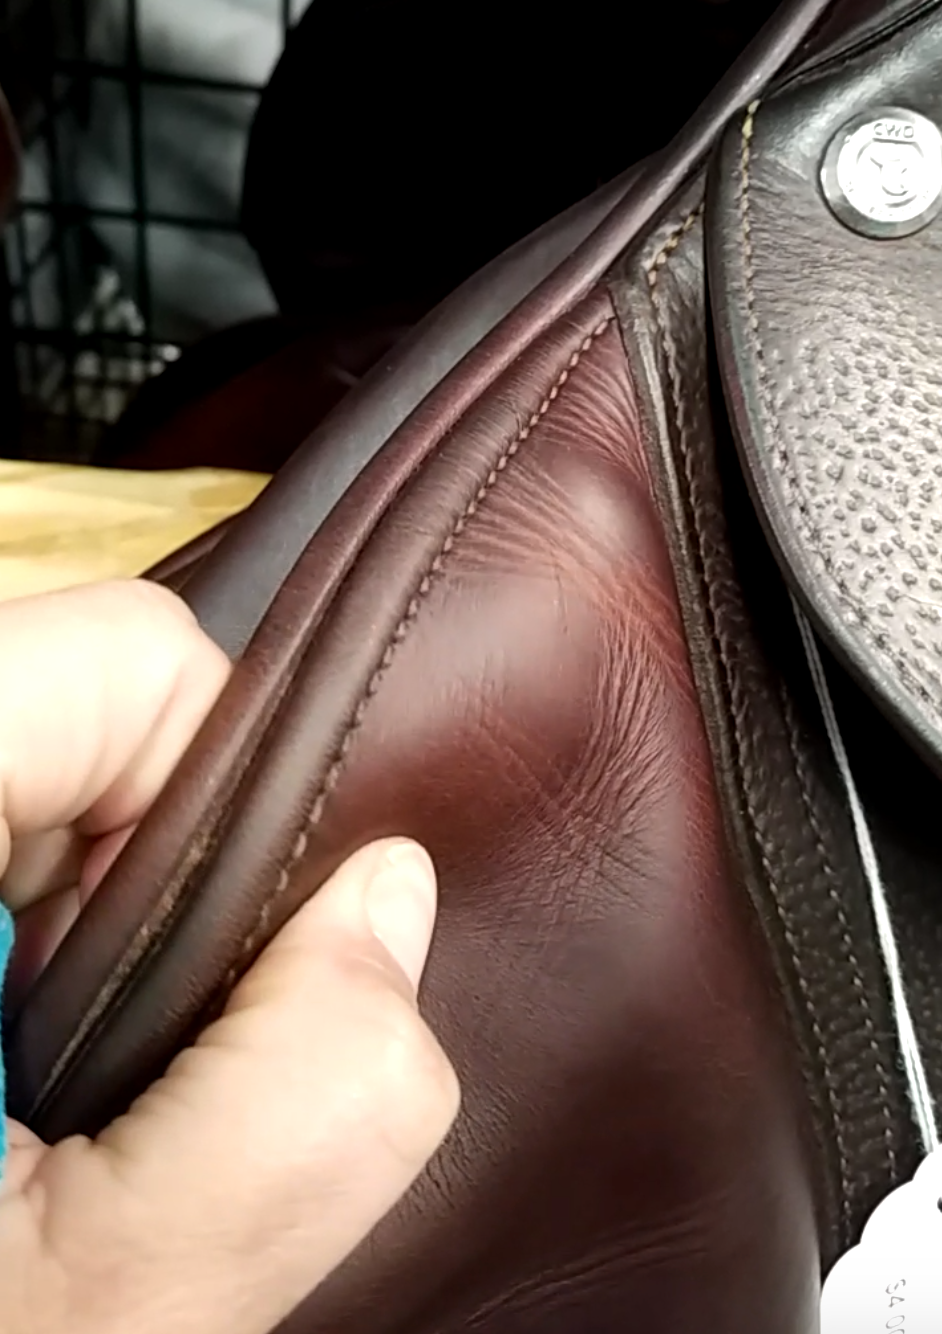 How to tell when your saddle is conditioned